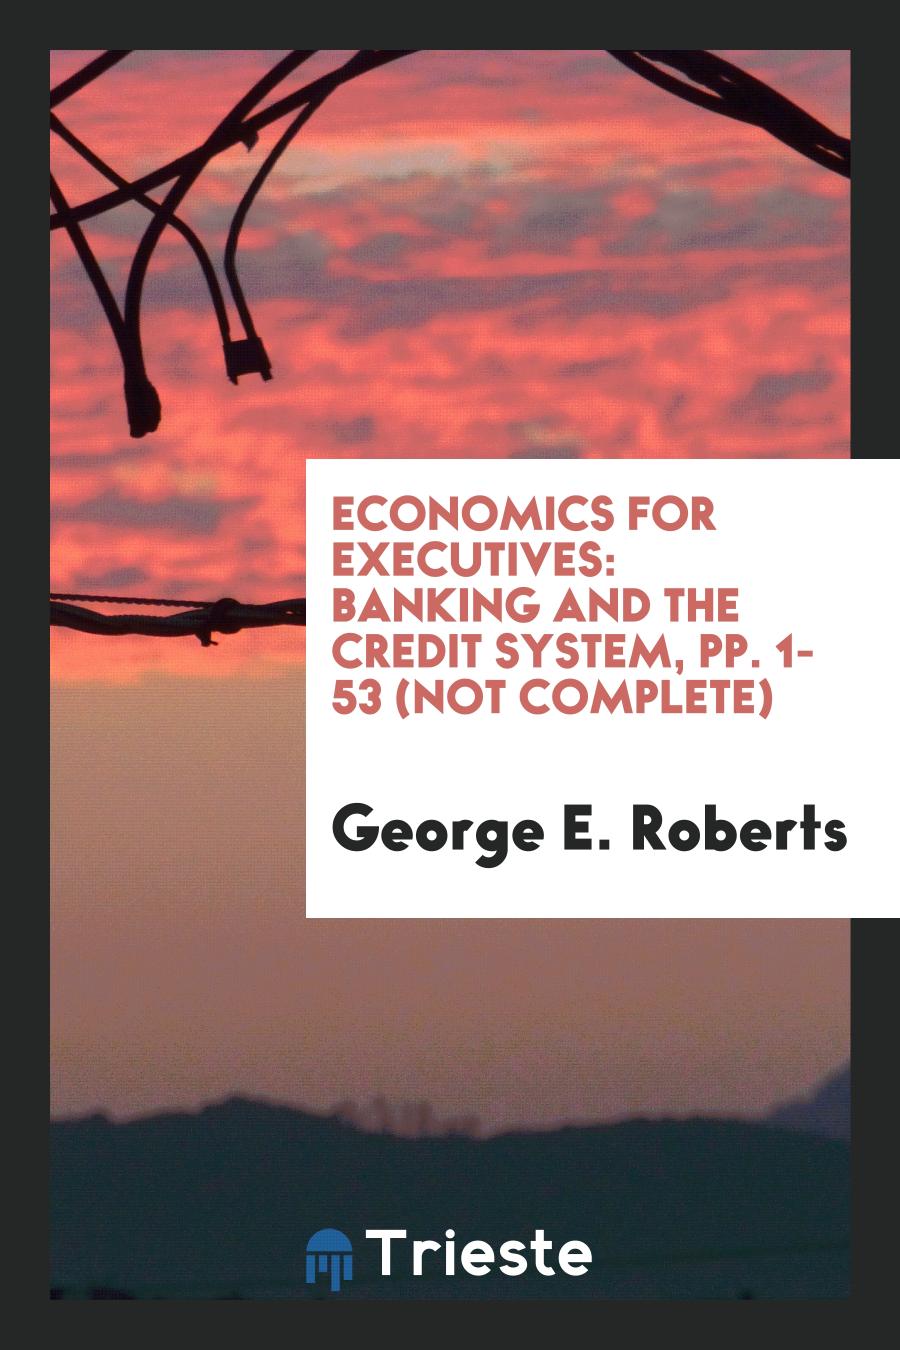 Economics for Executives: Banking and the credit system, pp. 1-53 (not complete)